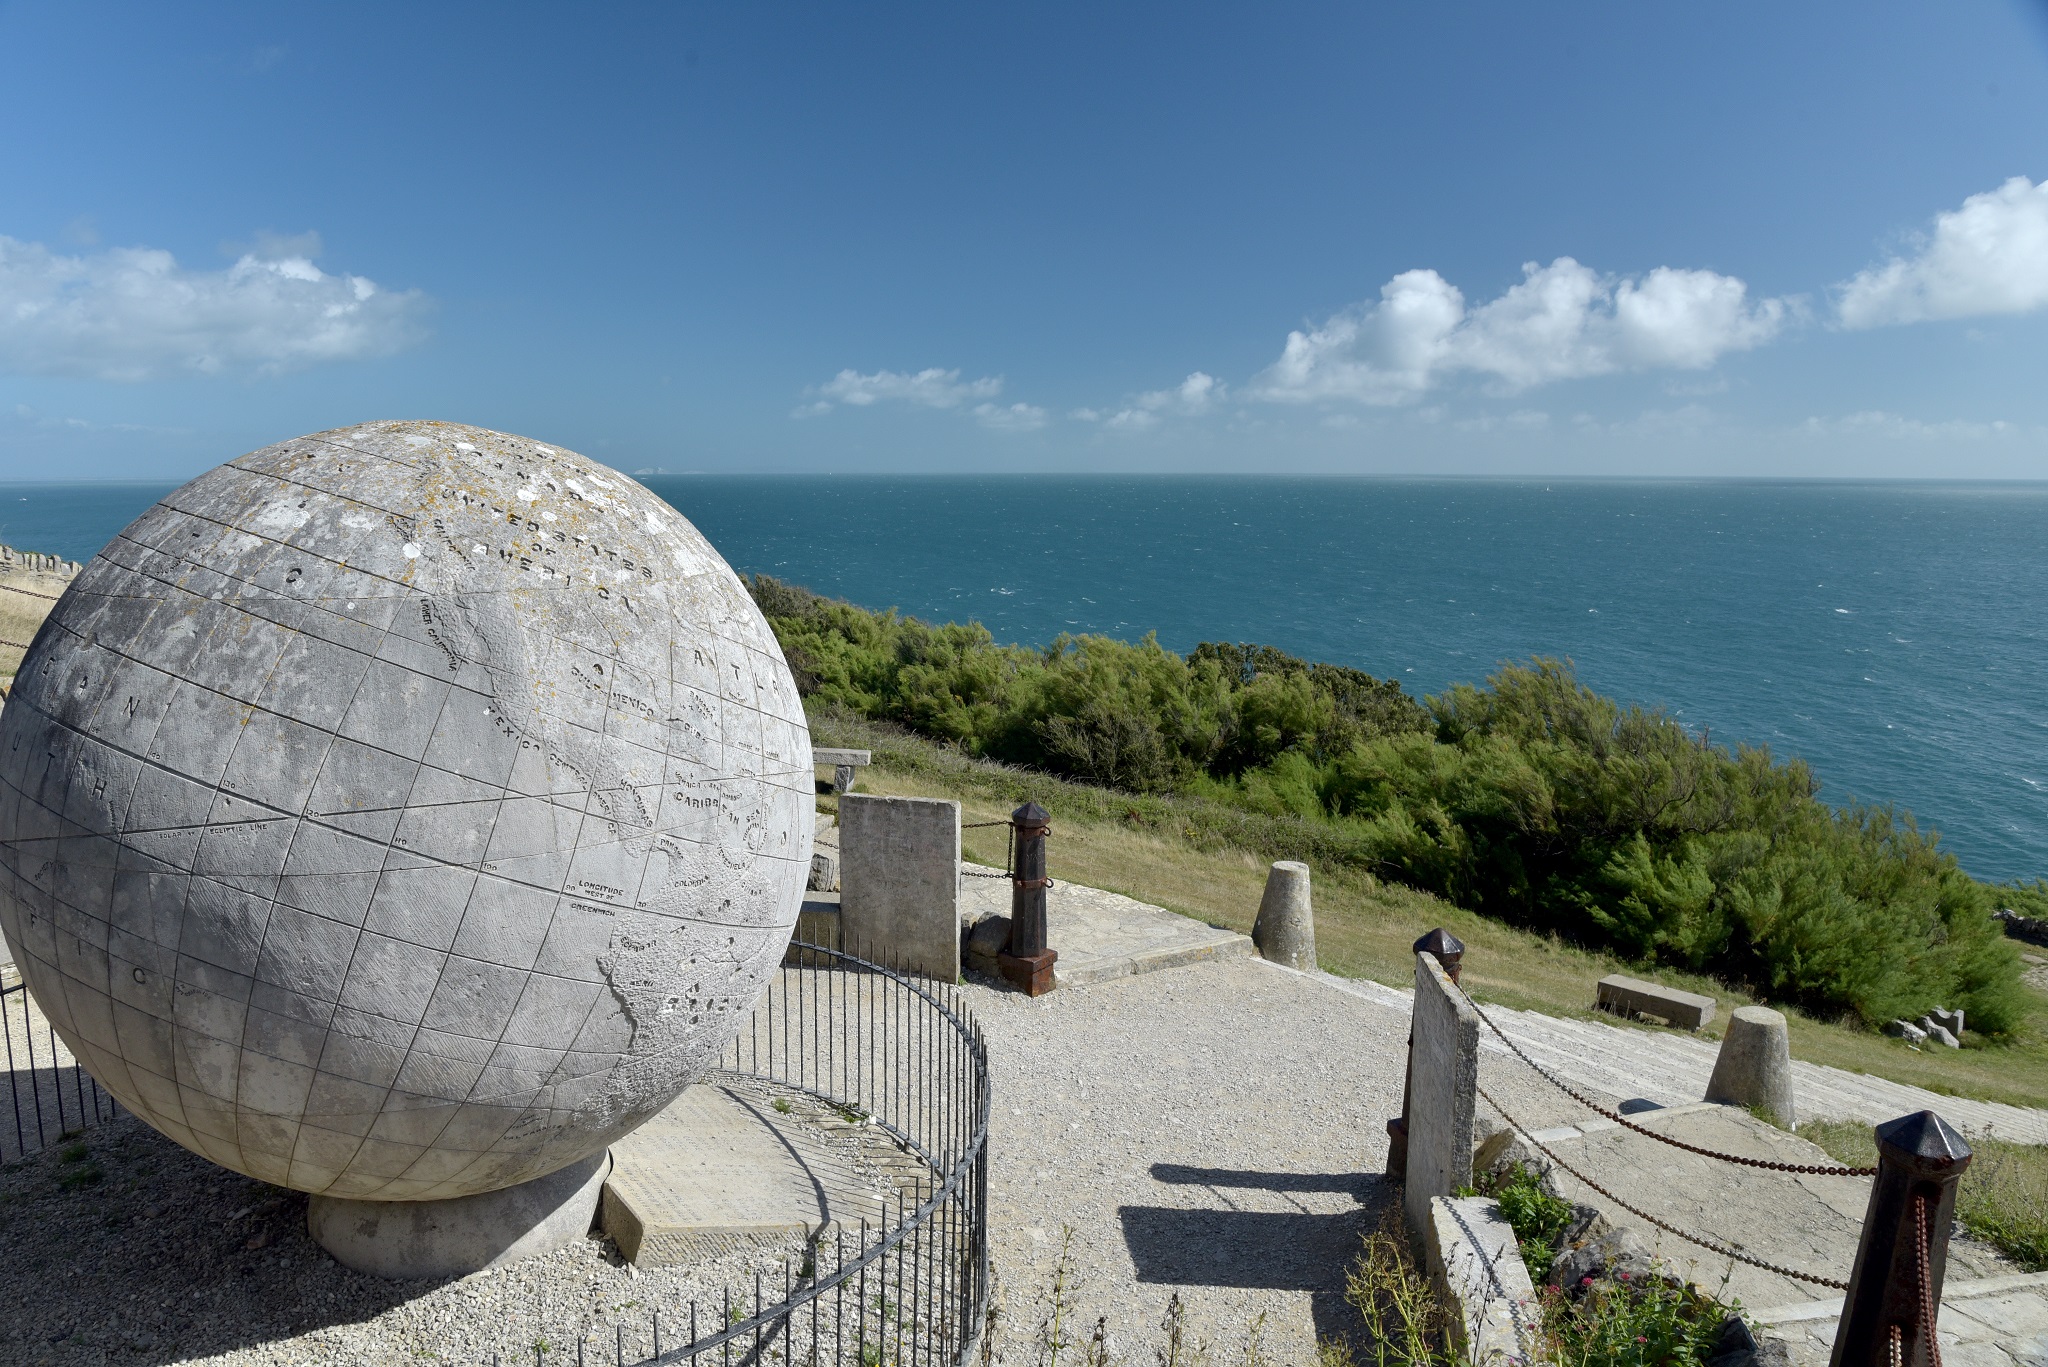 Wild Wednesdays are running at Durlston Country Park